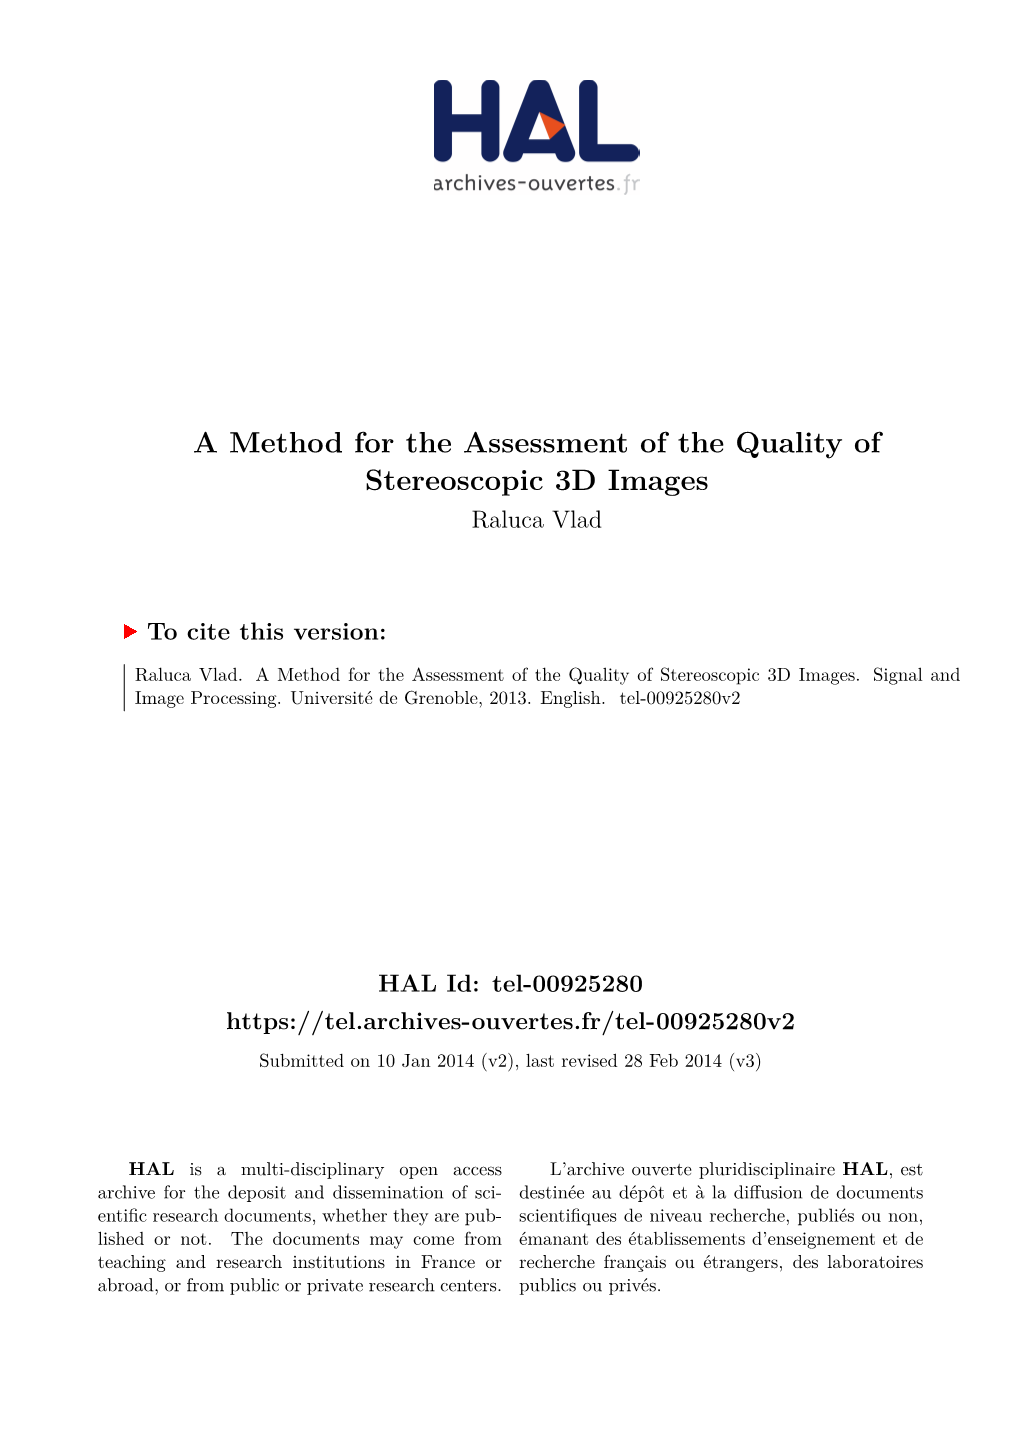 A Method for the Assessment of the Quality of Stereoscopic 3D Images Raluca Vlad